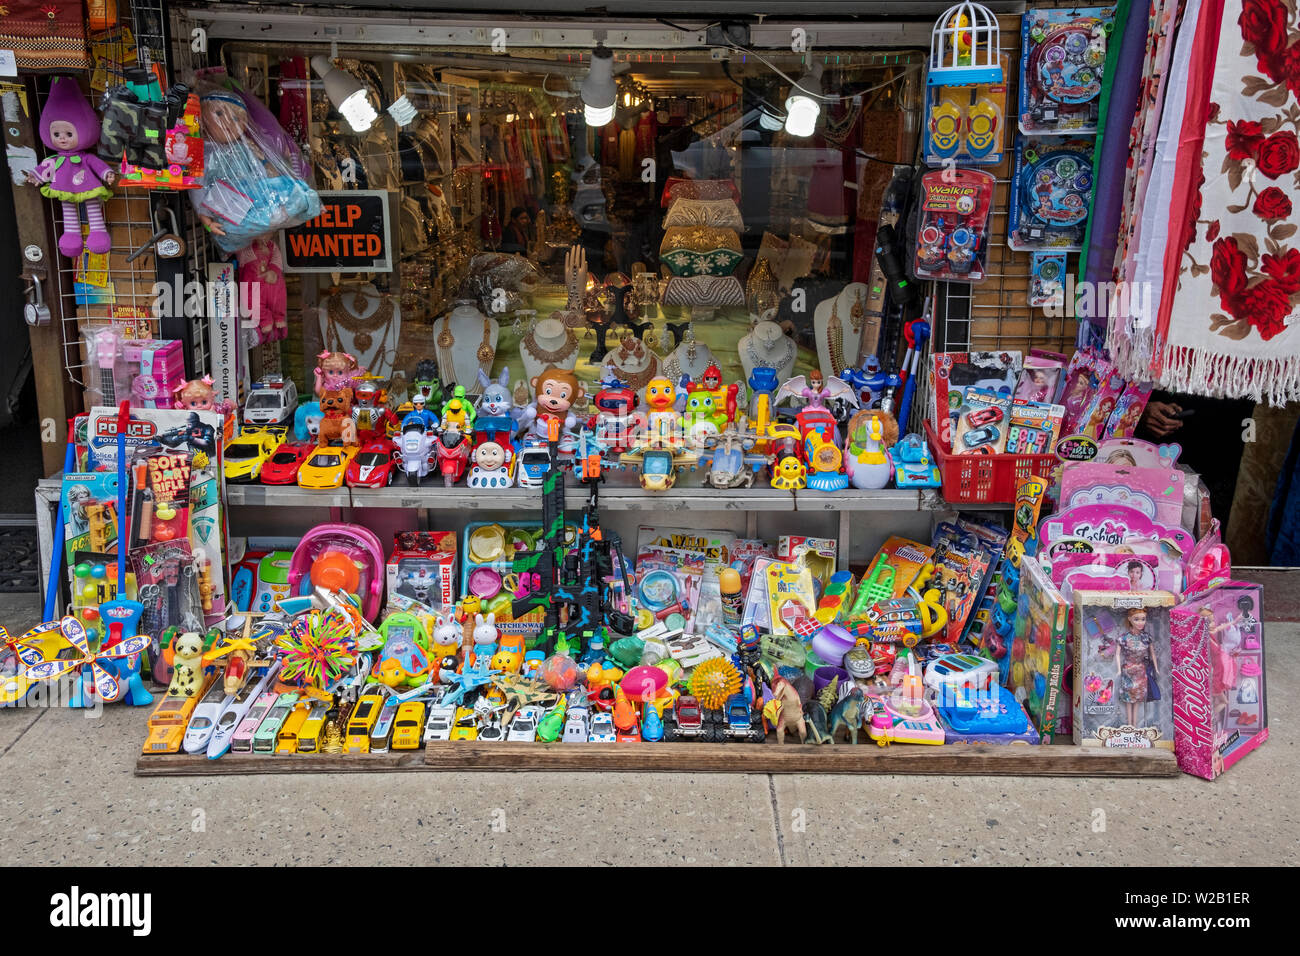 A very crowded display of inexpensive children's toys for sale outside a sari shop on 74th Street in Jackson Heights, Queens, New York City. Stock Photo